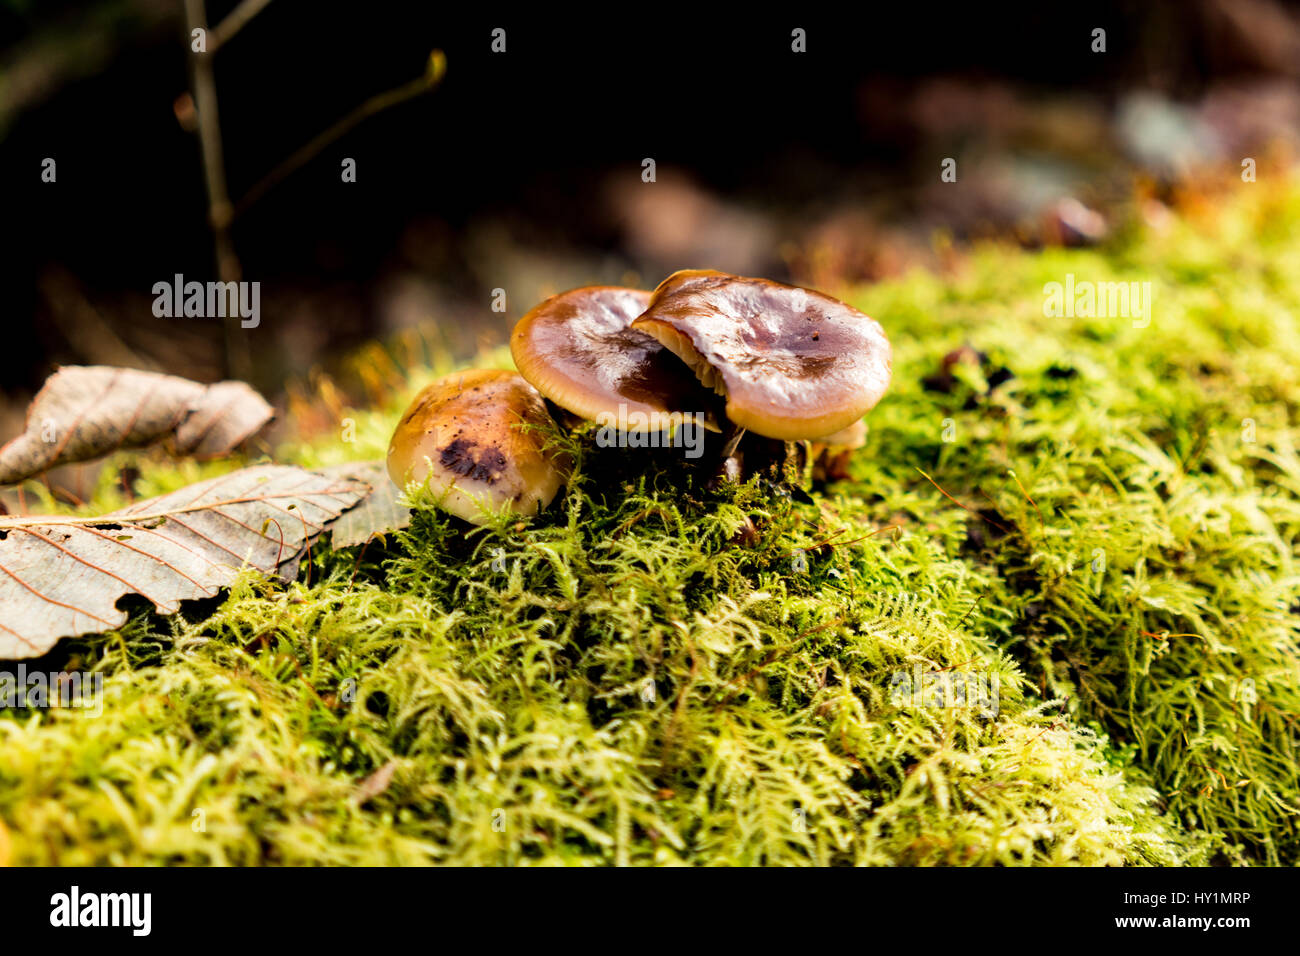 Close up shot of a small mushroom clumped on a log in discovery park Stock Photo